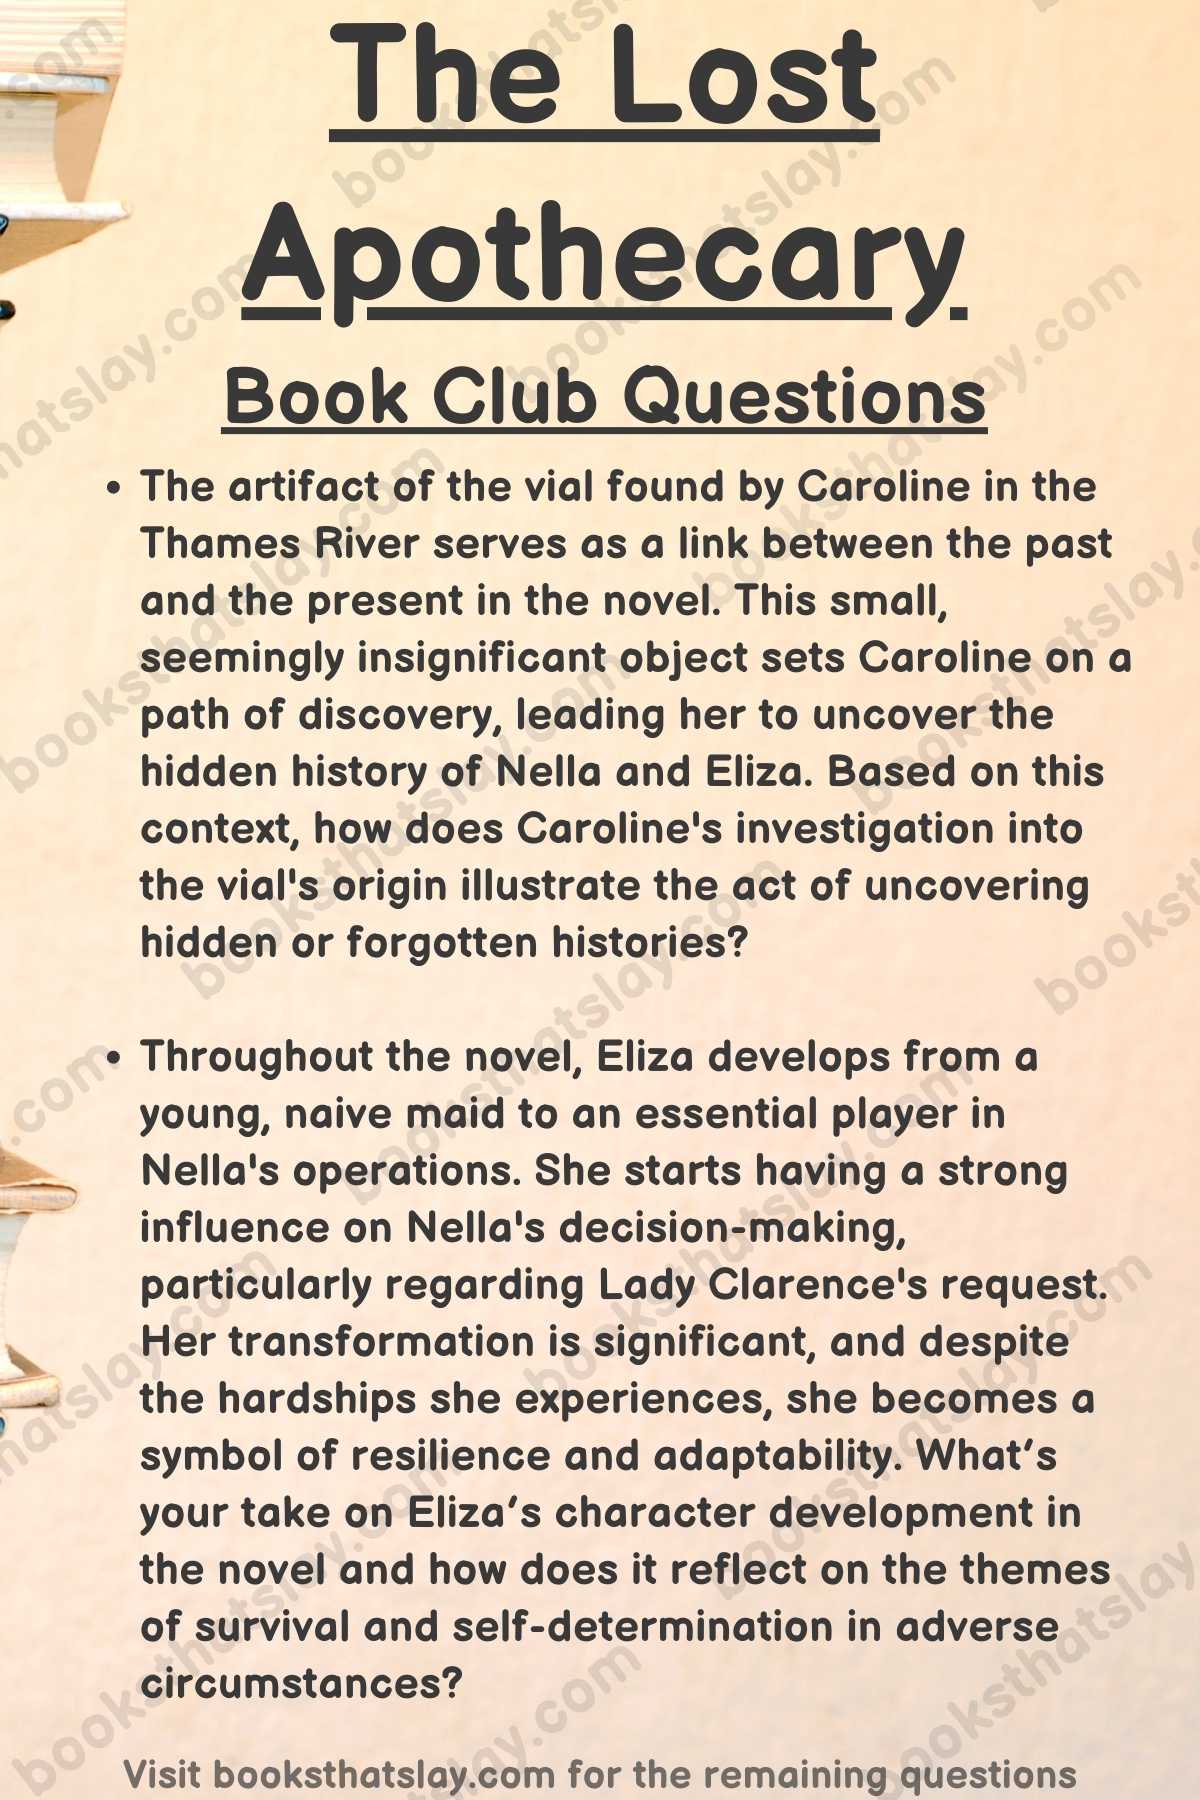 The Lost Apothecary Book Club Questions Infographic